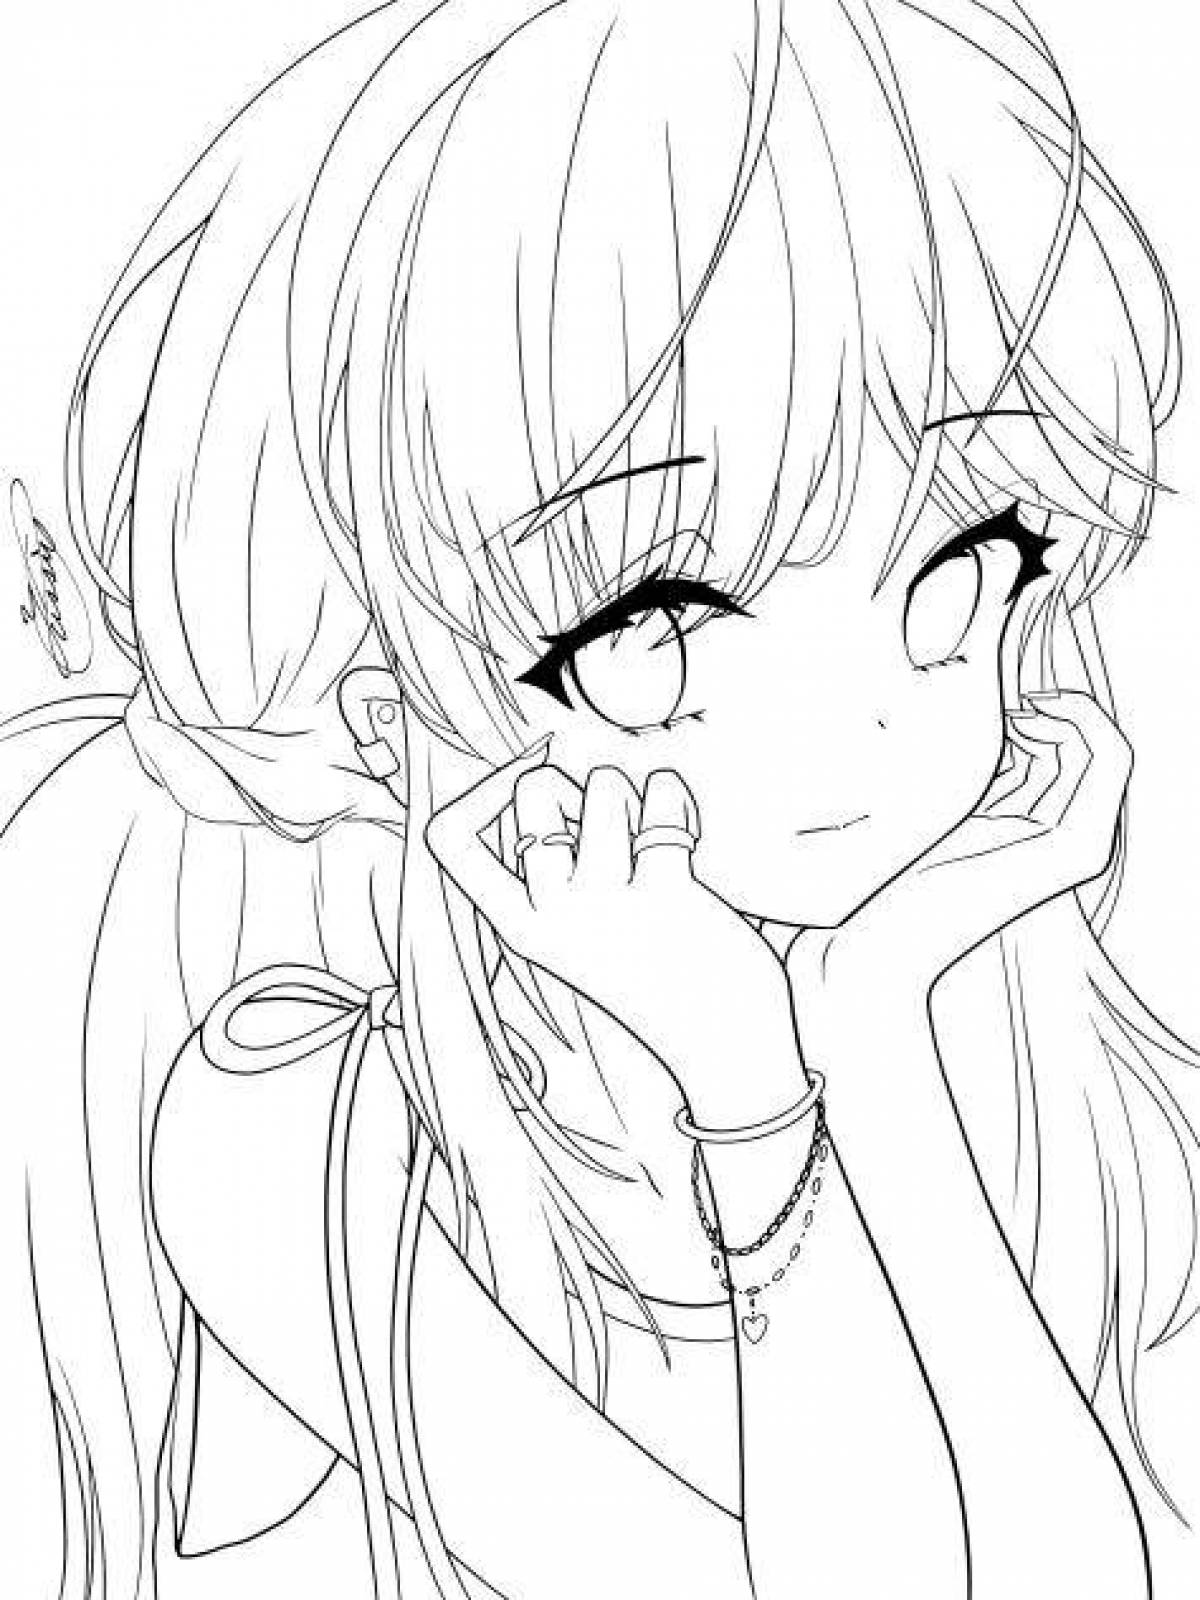 Cute ibis paint x coloring page